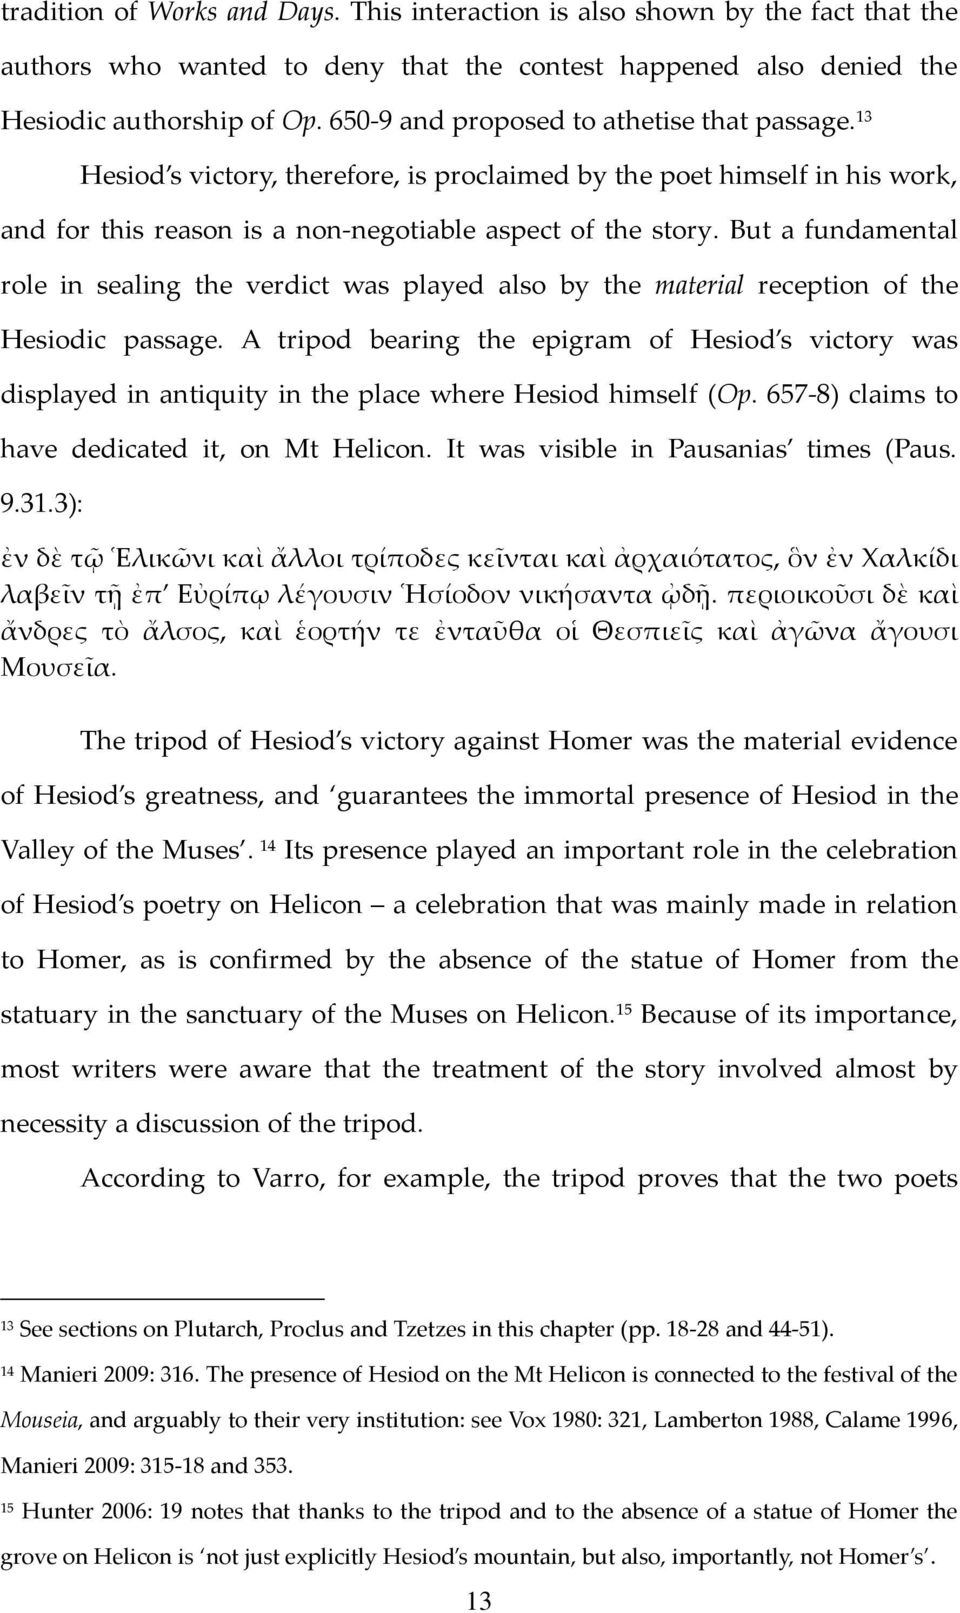 But a fundamental role in sealing the verdict was played also by the material reception of the Hesiodic passage.